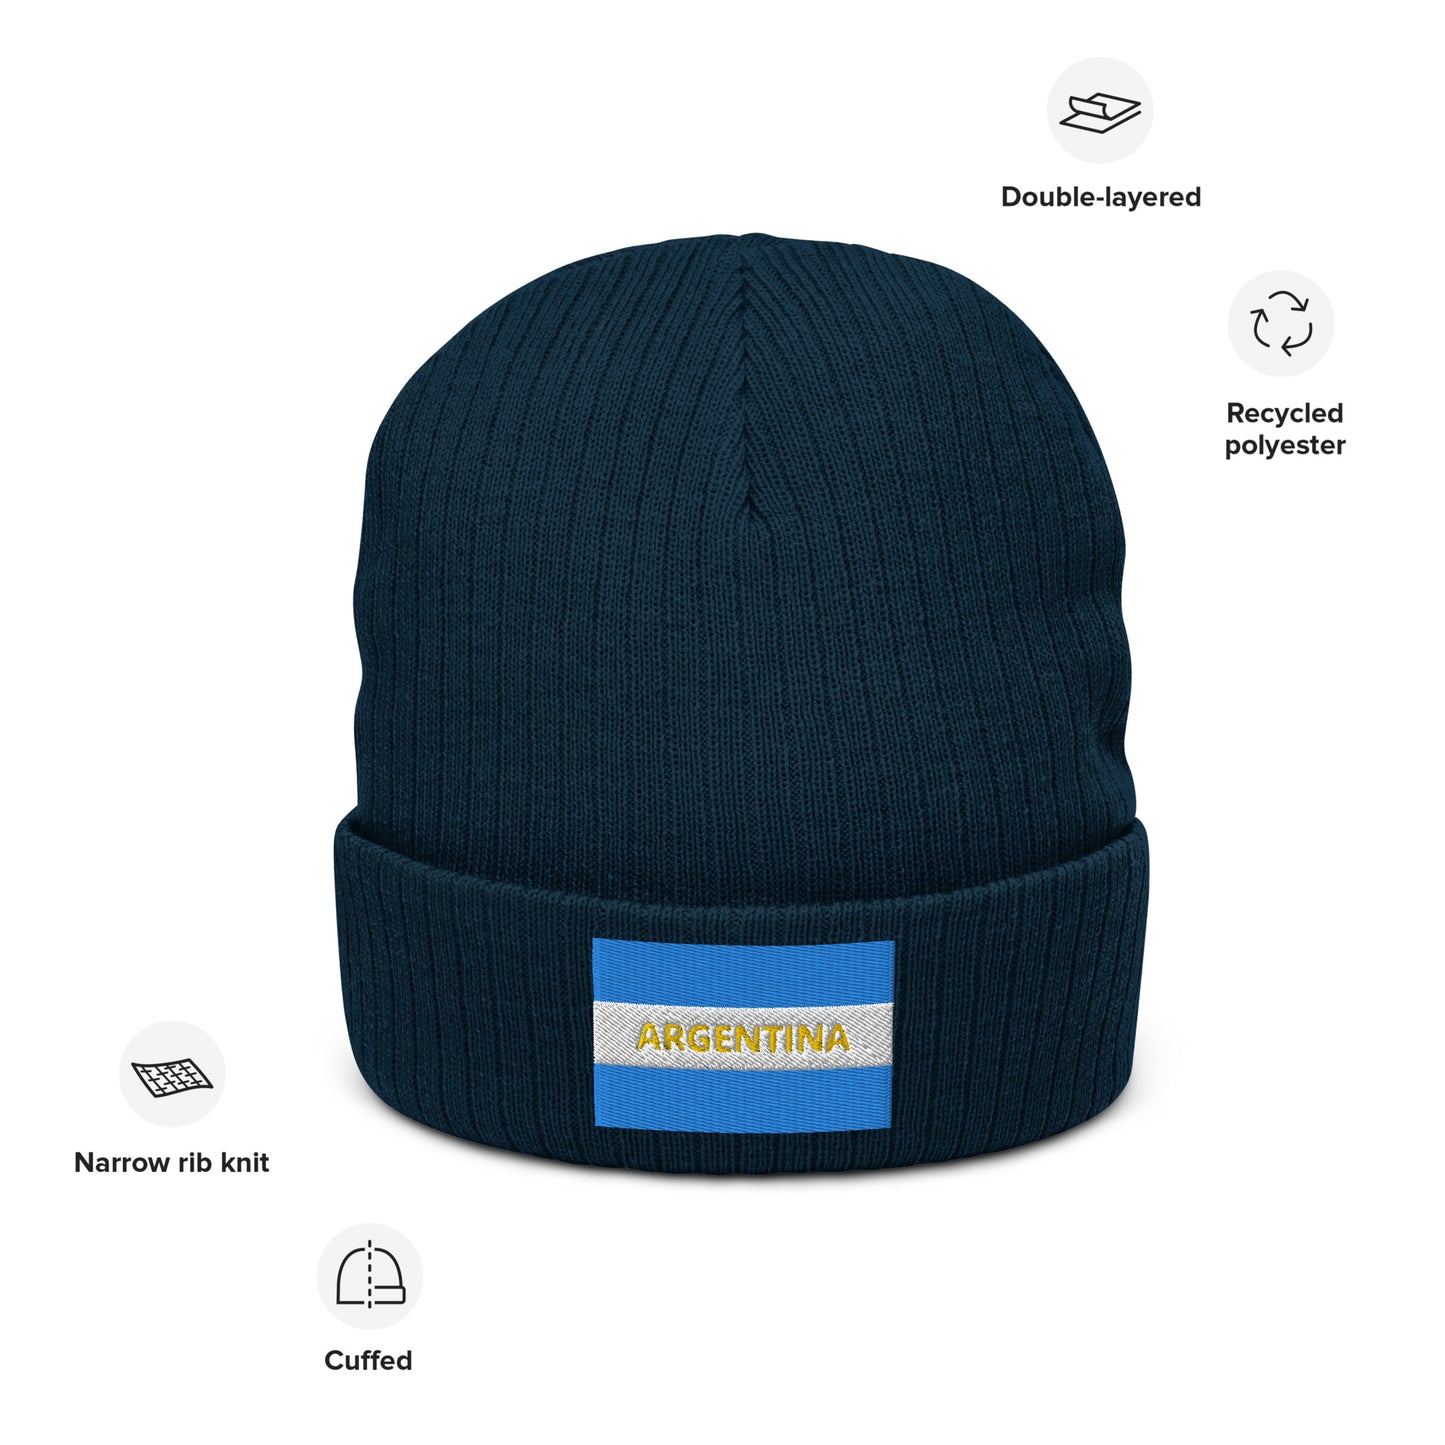 Ribbed Knit Embroidered Argentina Beanie  Recycled Polyester Blue color